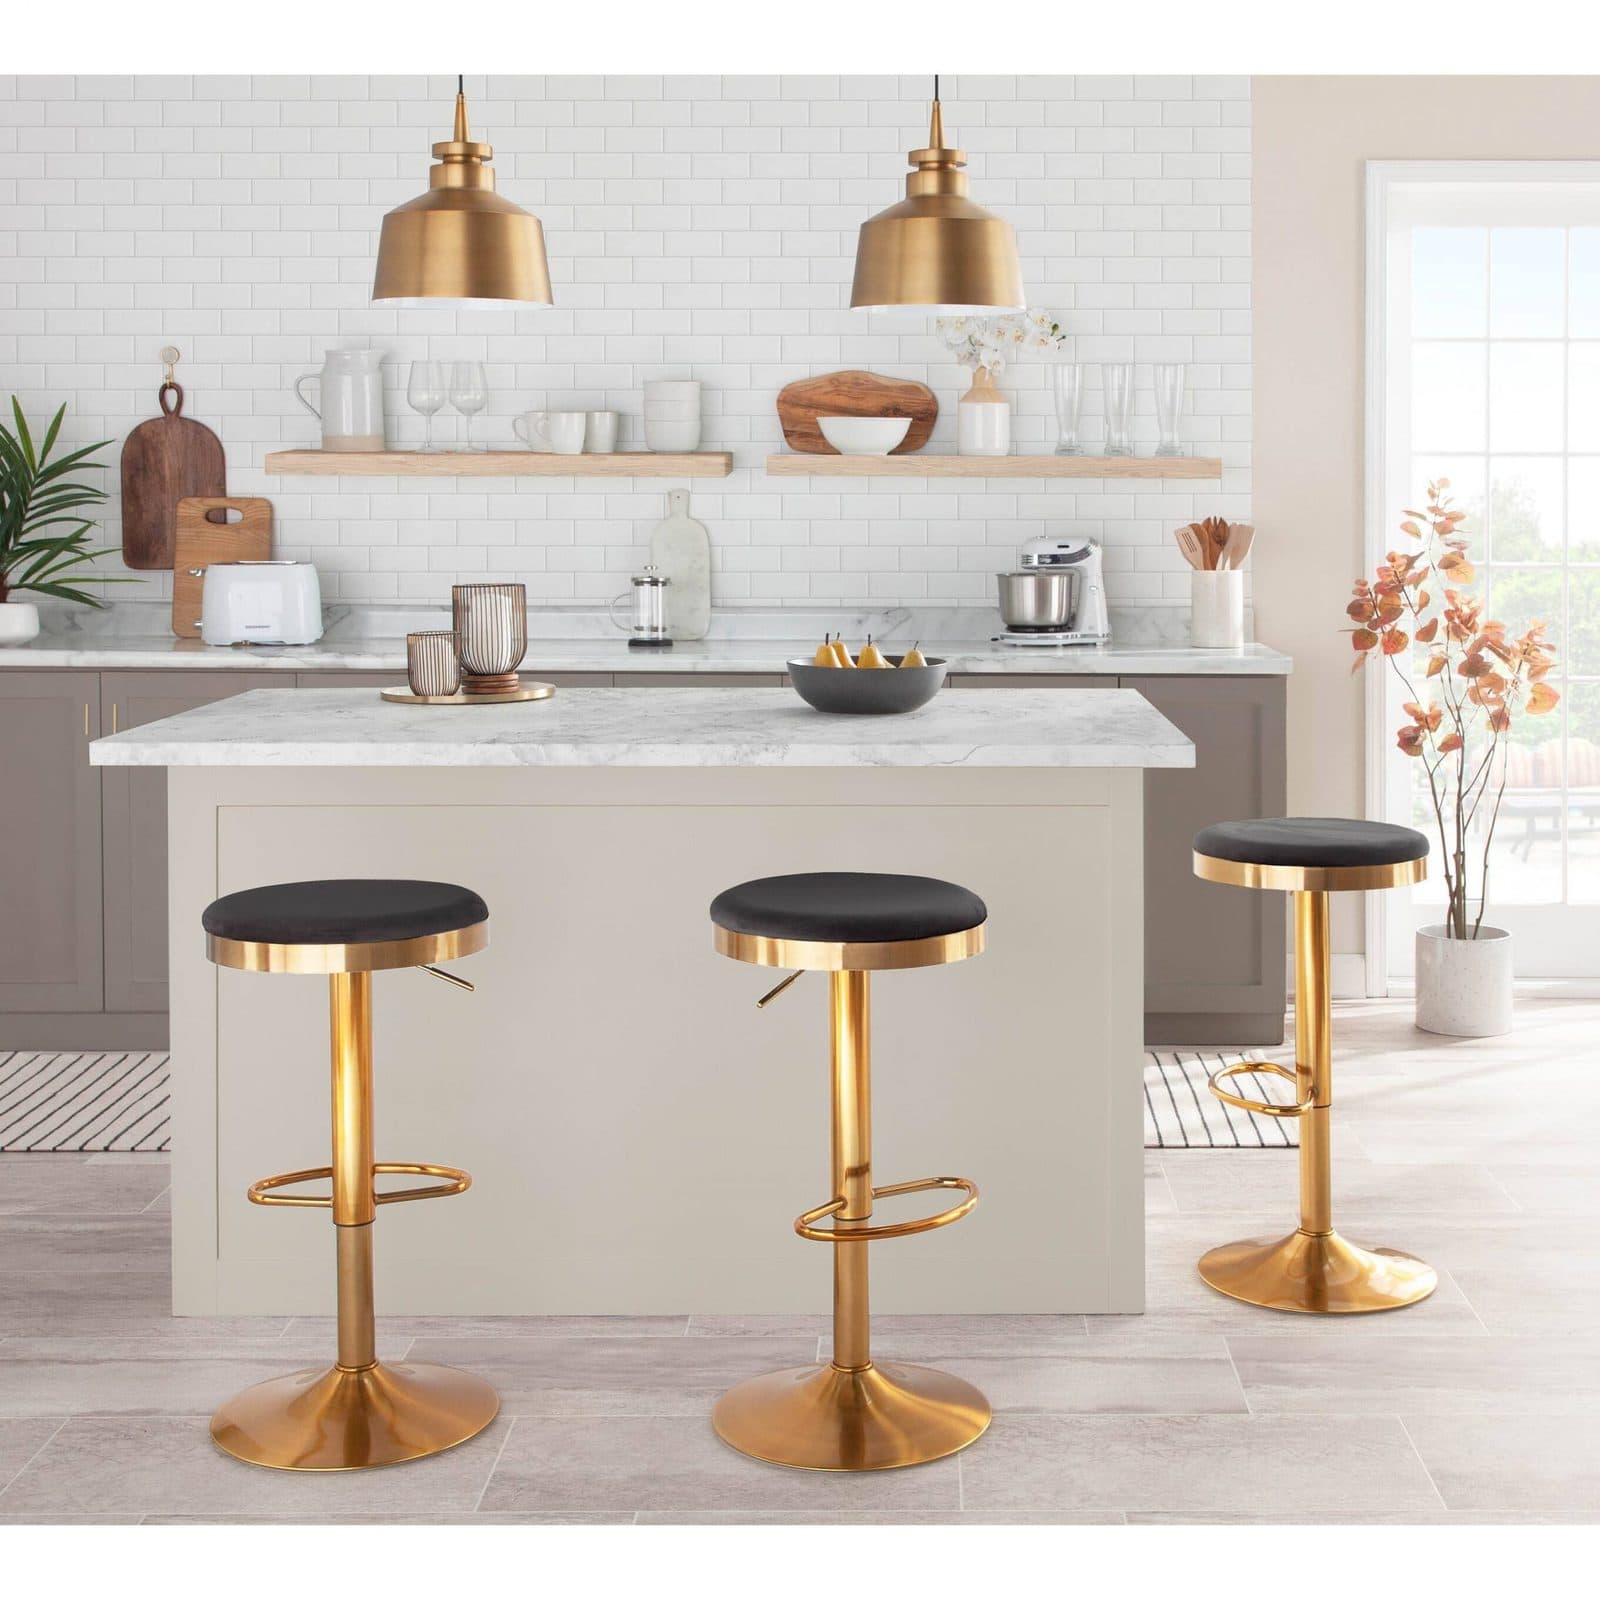 15 Best Stools For Kitchen Island, How Tall Should Kitchen Island Bar Stools Be Placed